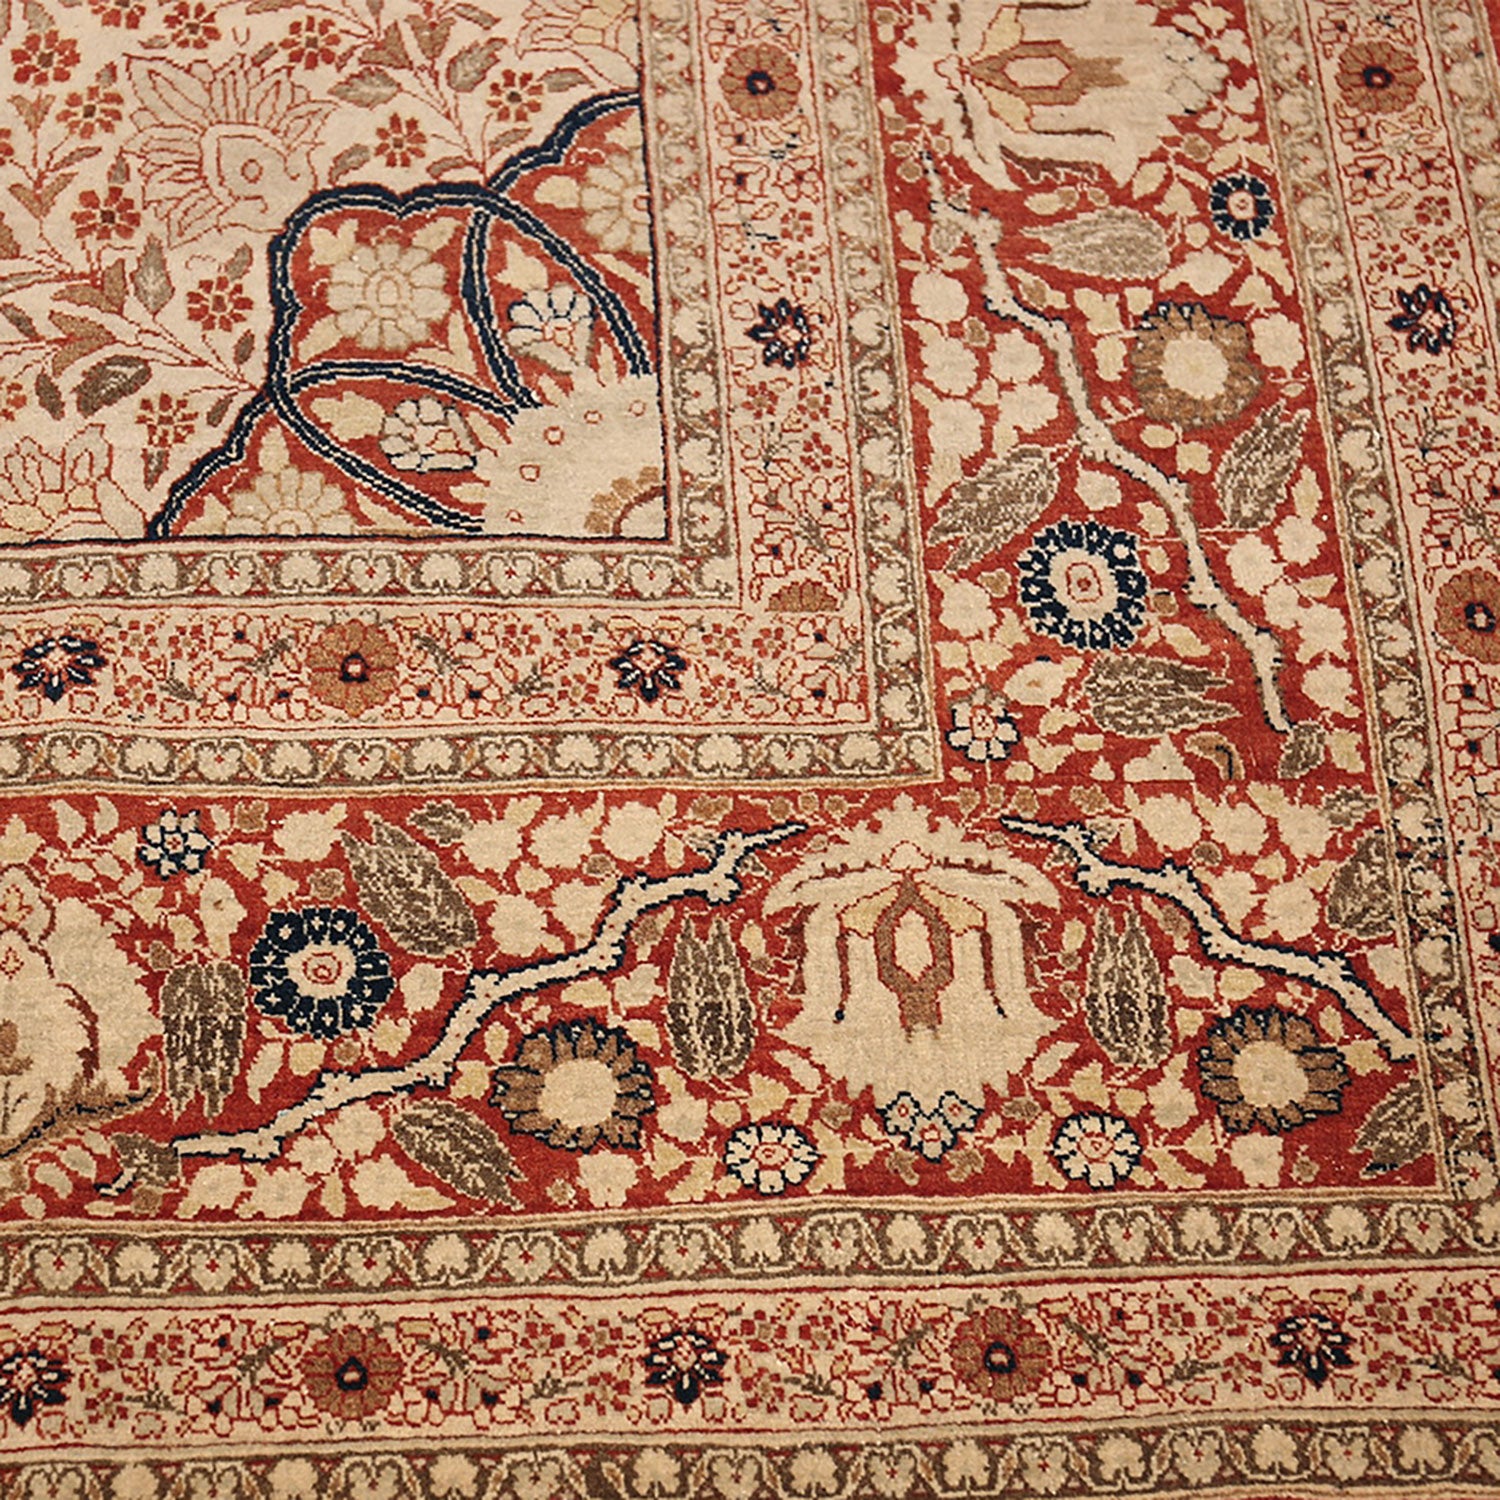 Exquisite handwoven Persian-inspired rug adorned with intricate floral patterns.